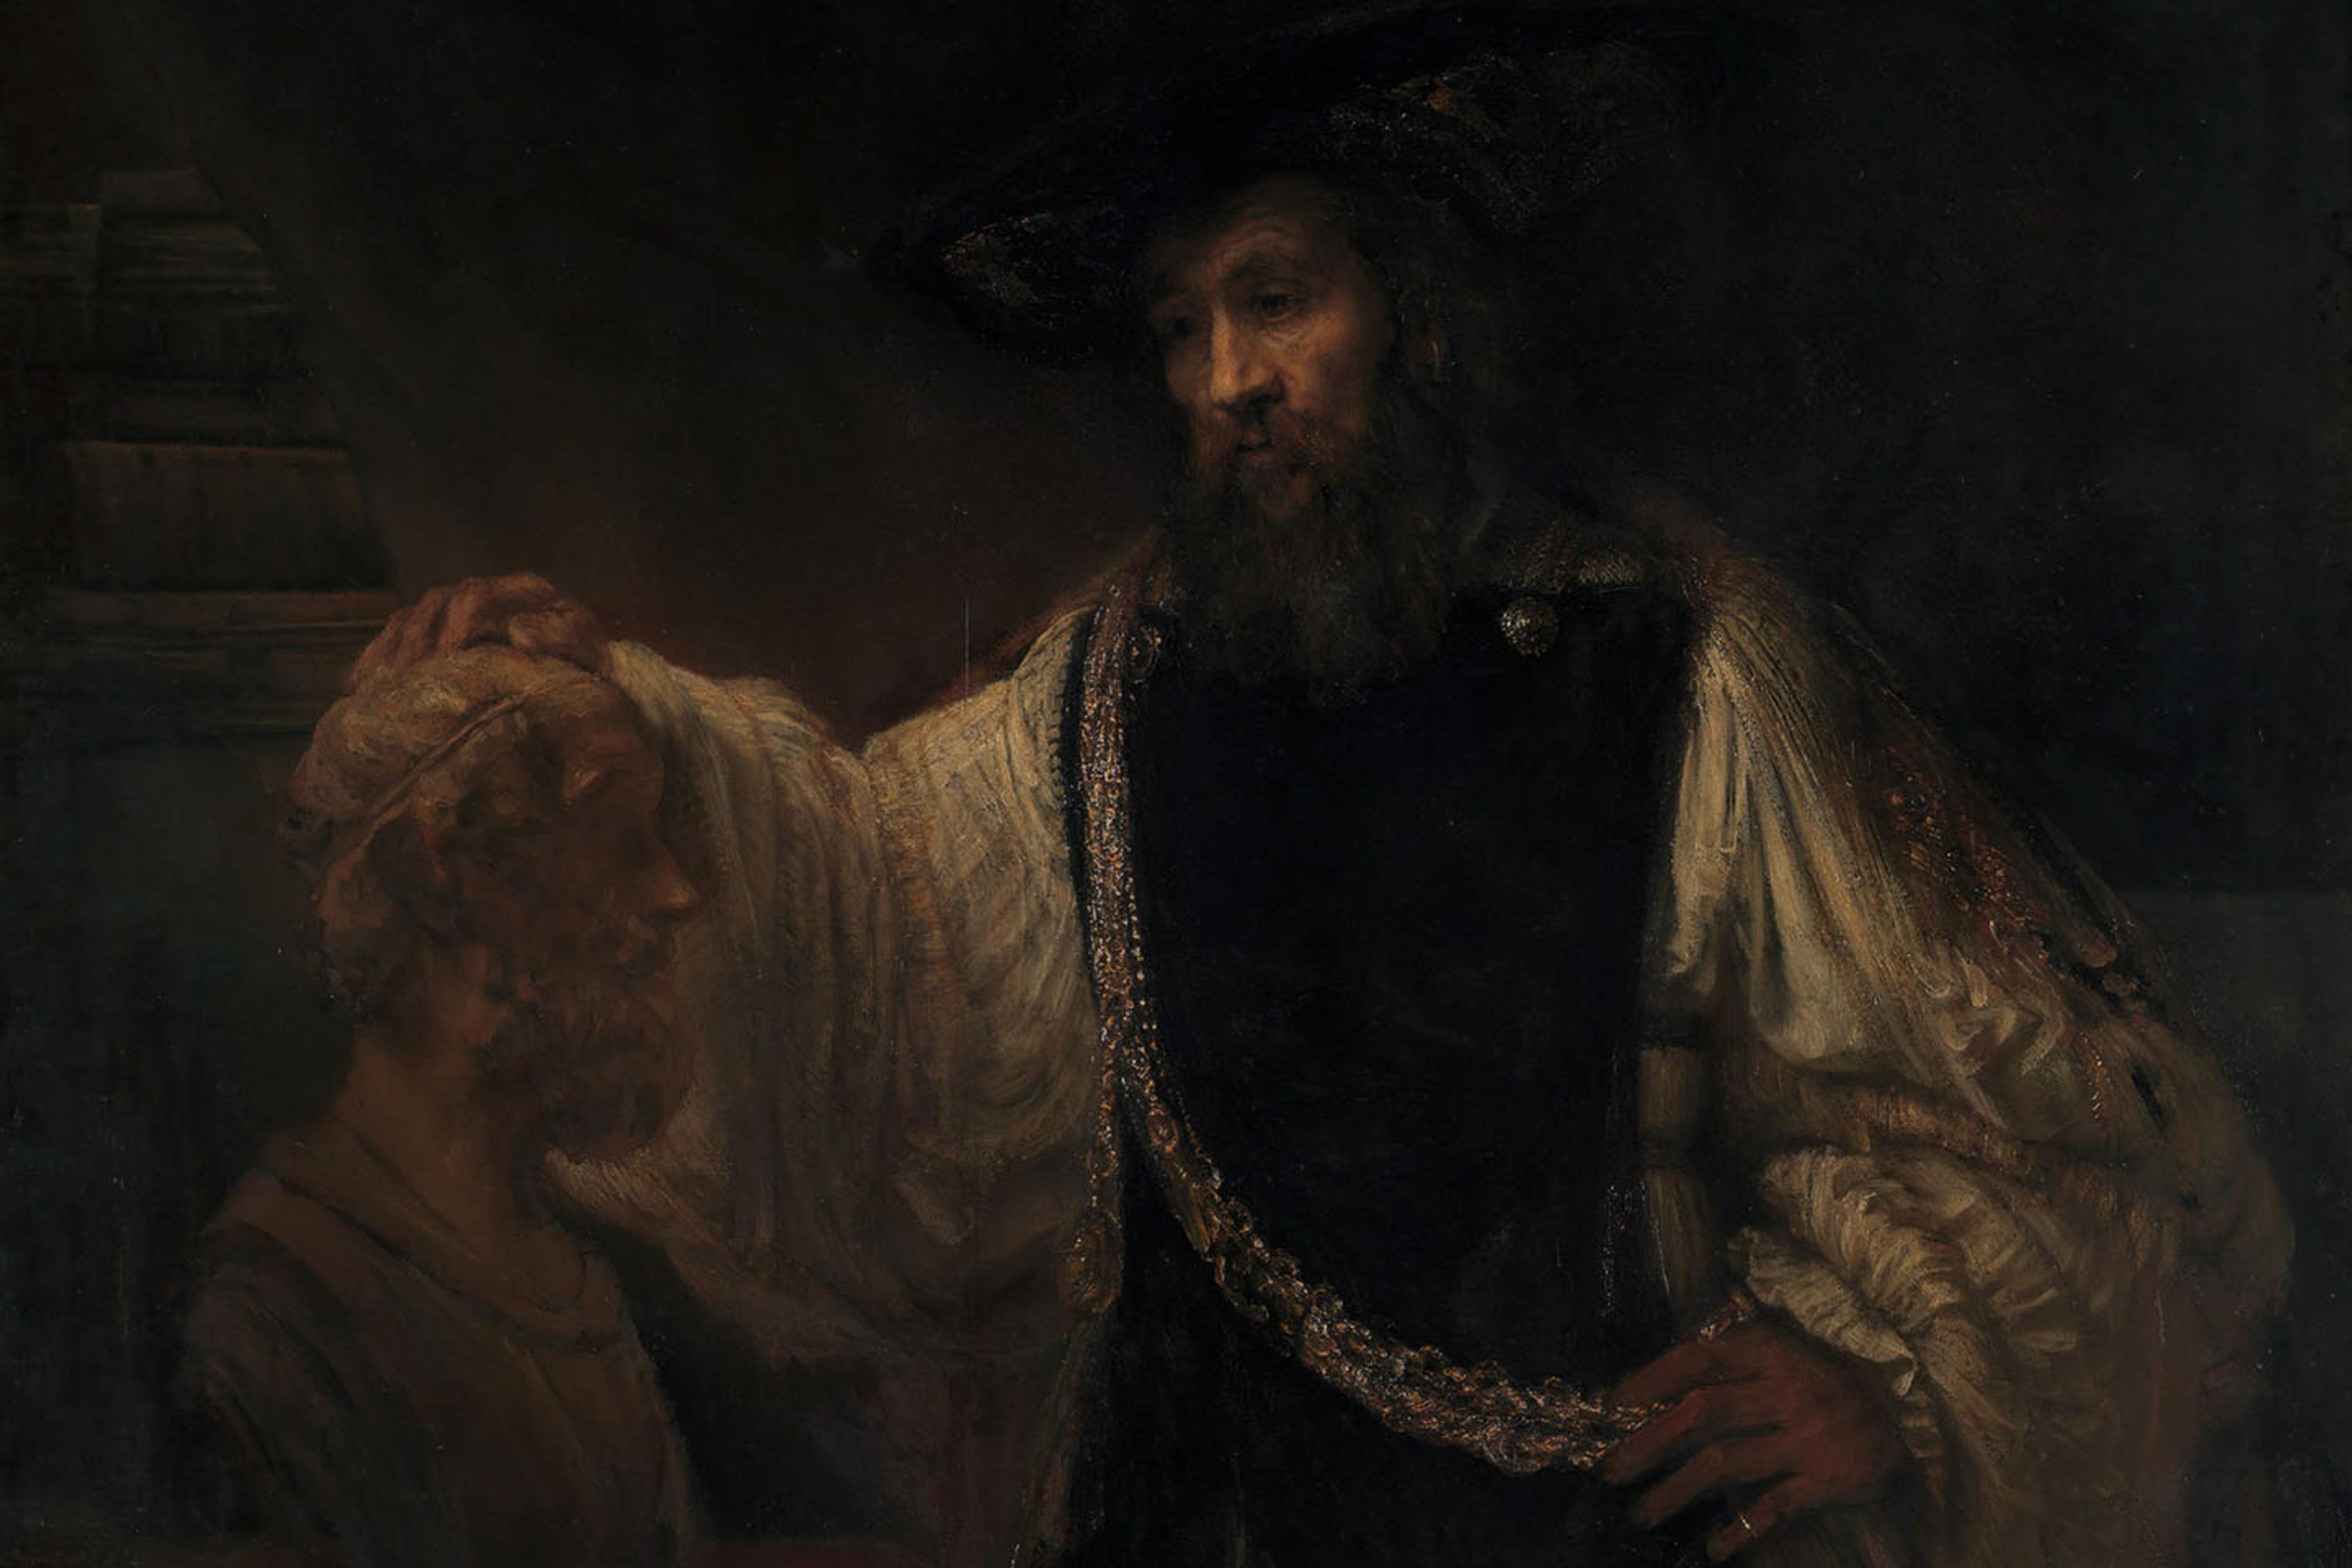 Rembrandt's "Aristotle with Bust of Homer"